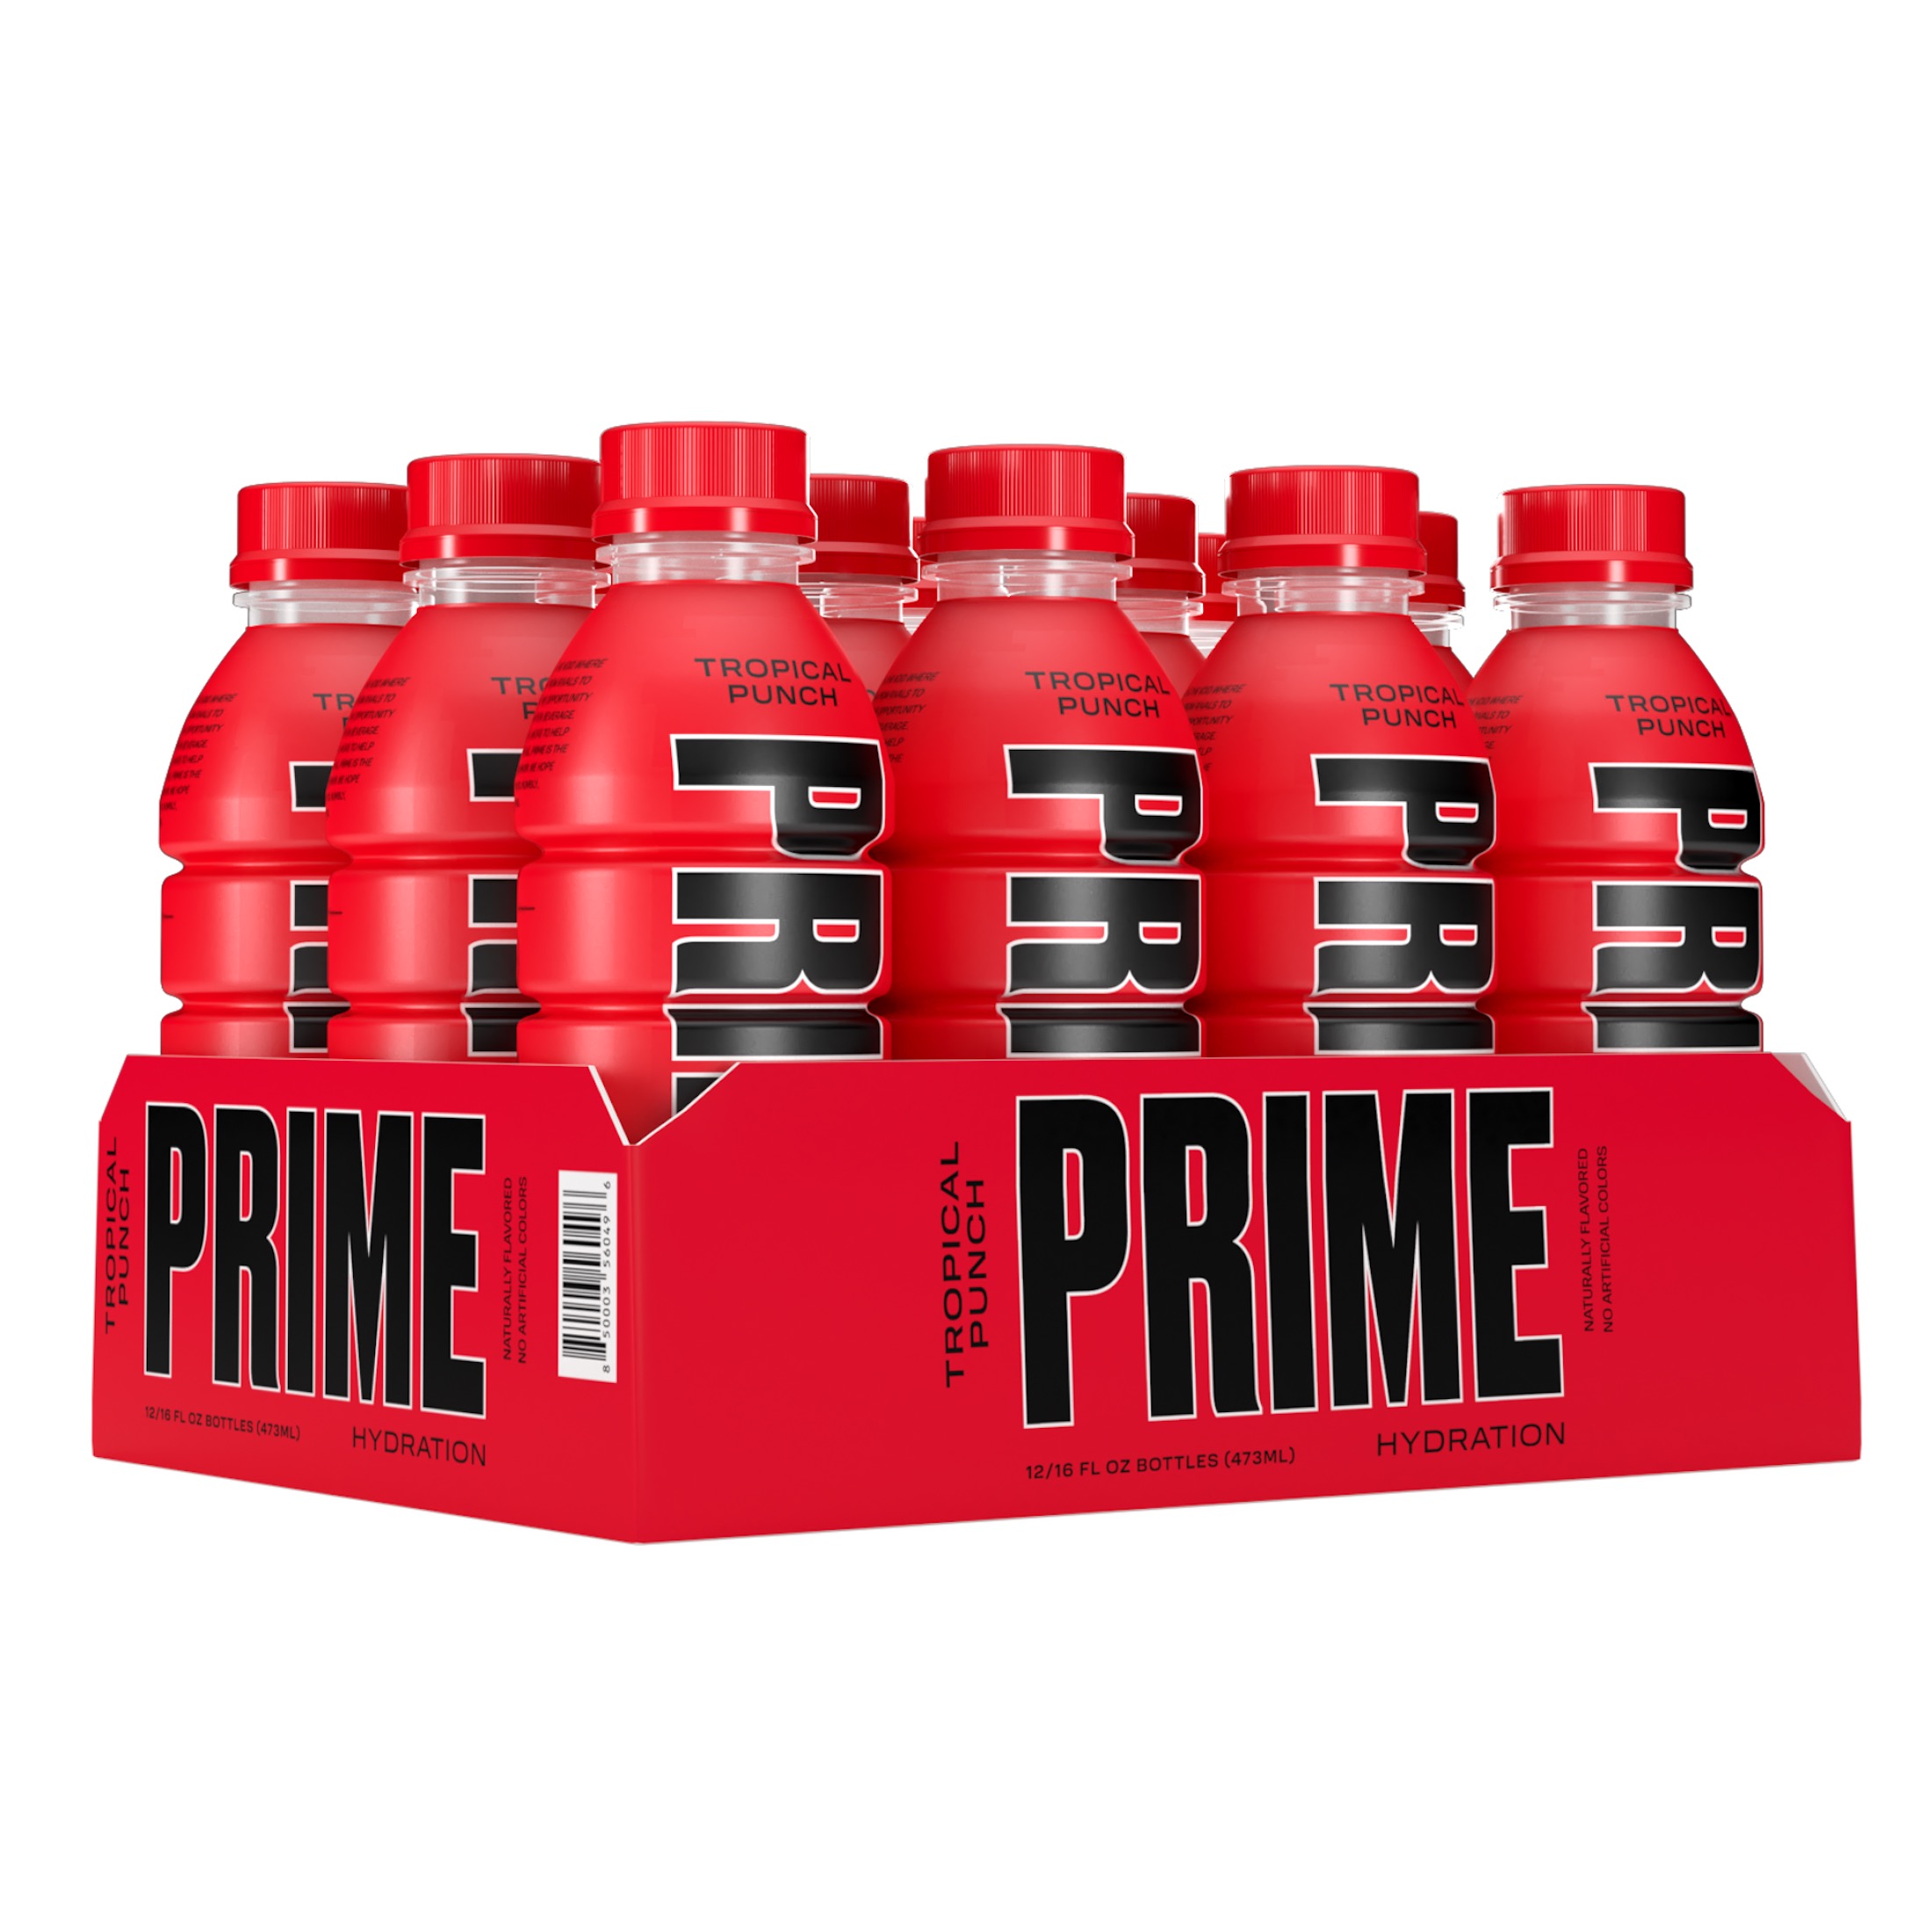 Prime Hydration with BCAA Blend for Muscle Recovery Tropical Punch (12 Drinks, 16 fl oz. Each) - image 3 of 4